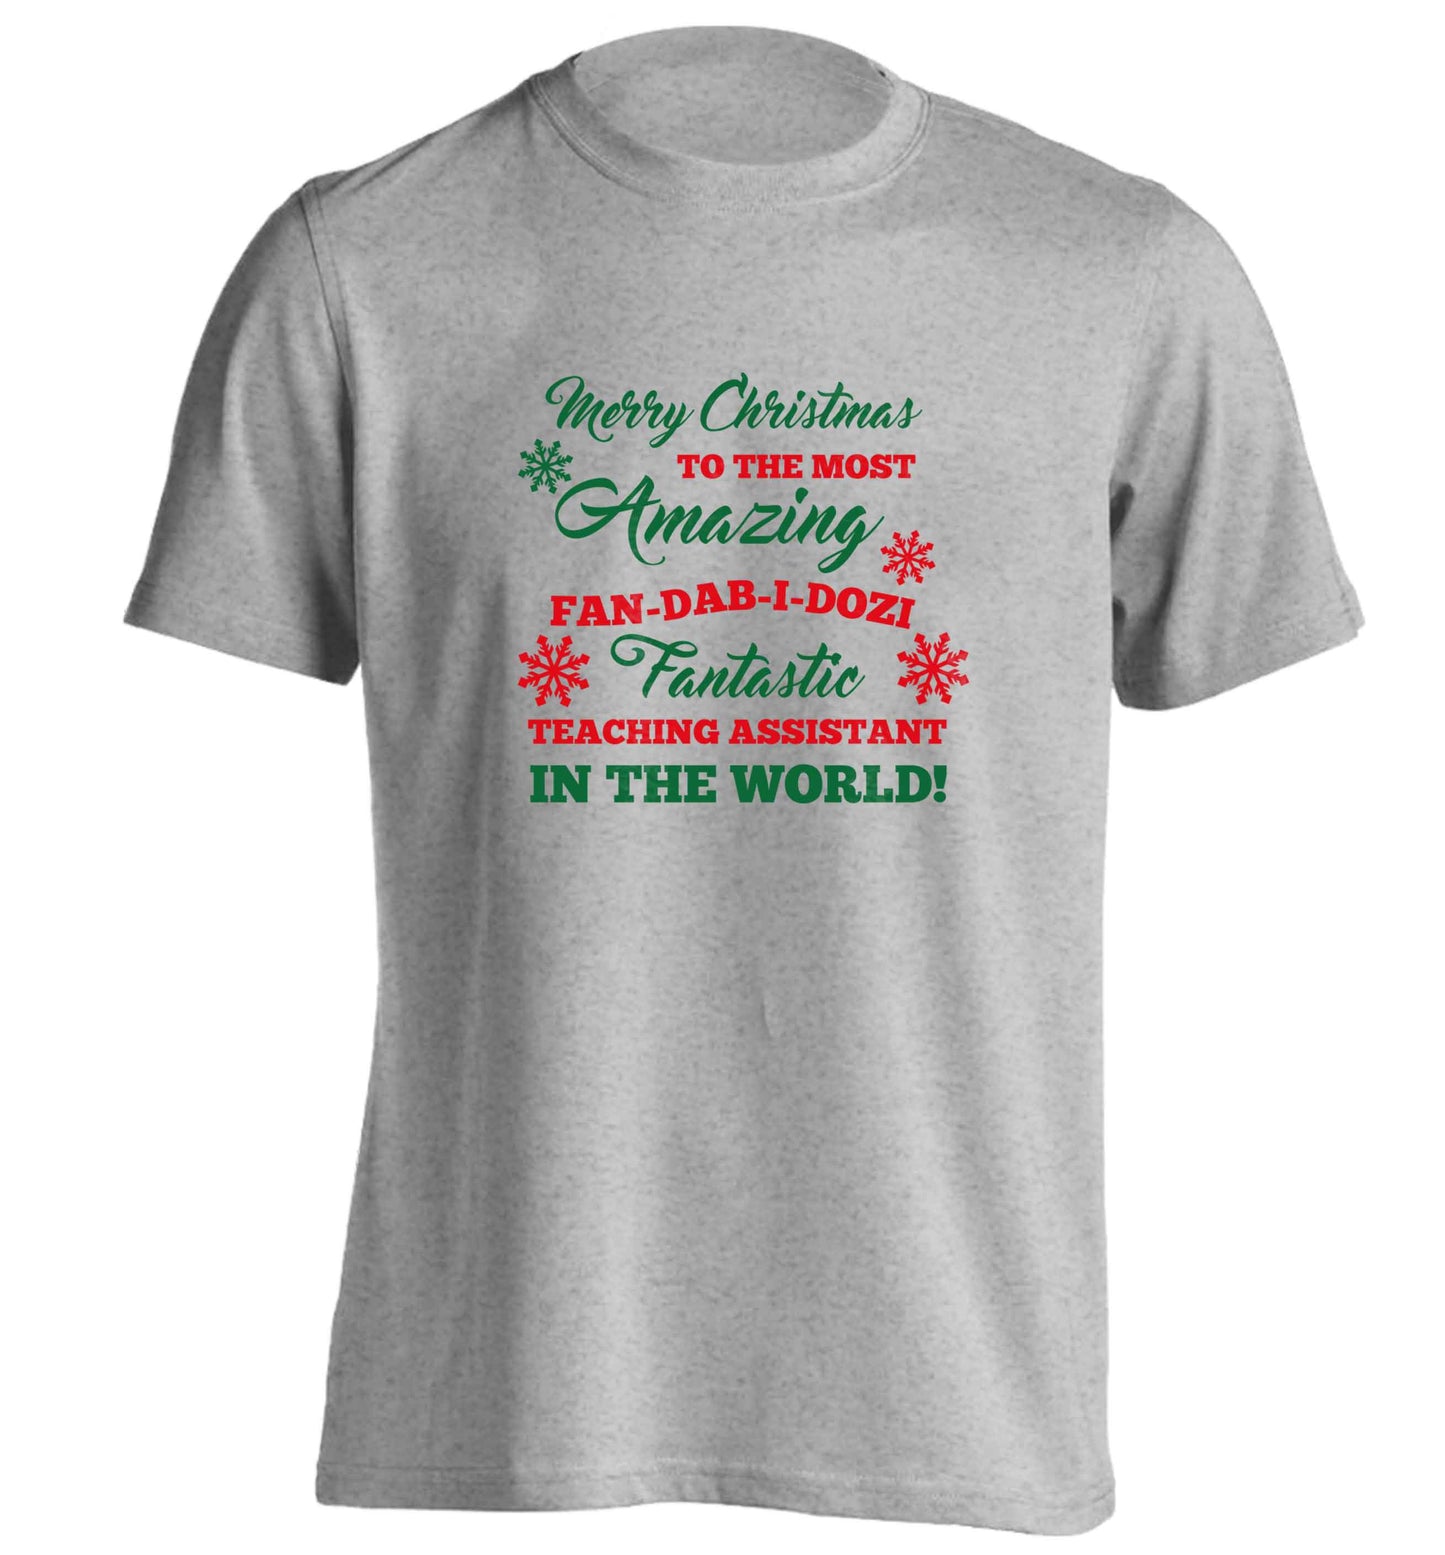 Merry Christmas to the most amazing fan-dab-i-dozi fantasic teaching assistant in the world adults unisex grey Tshirt 2XL